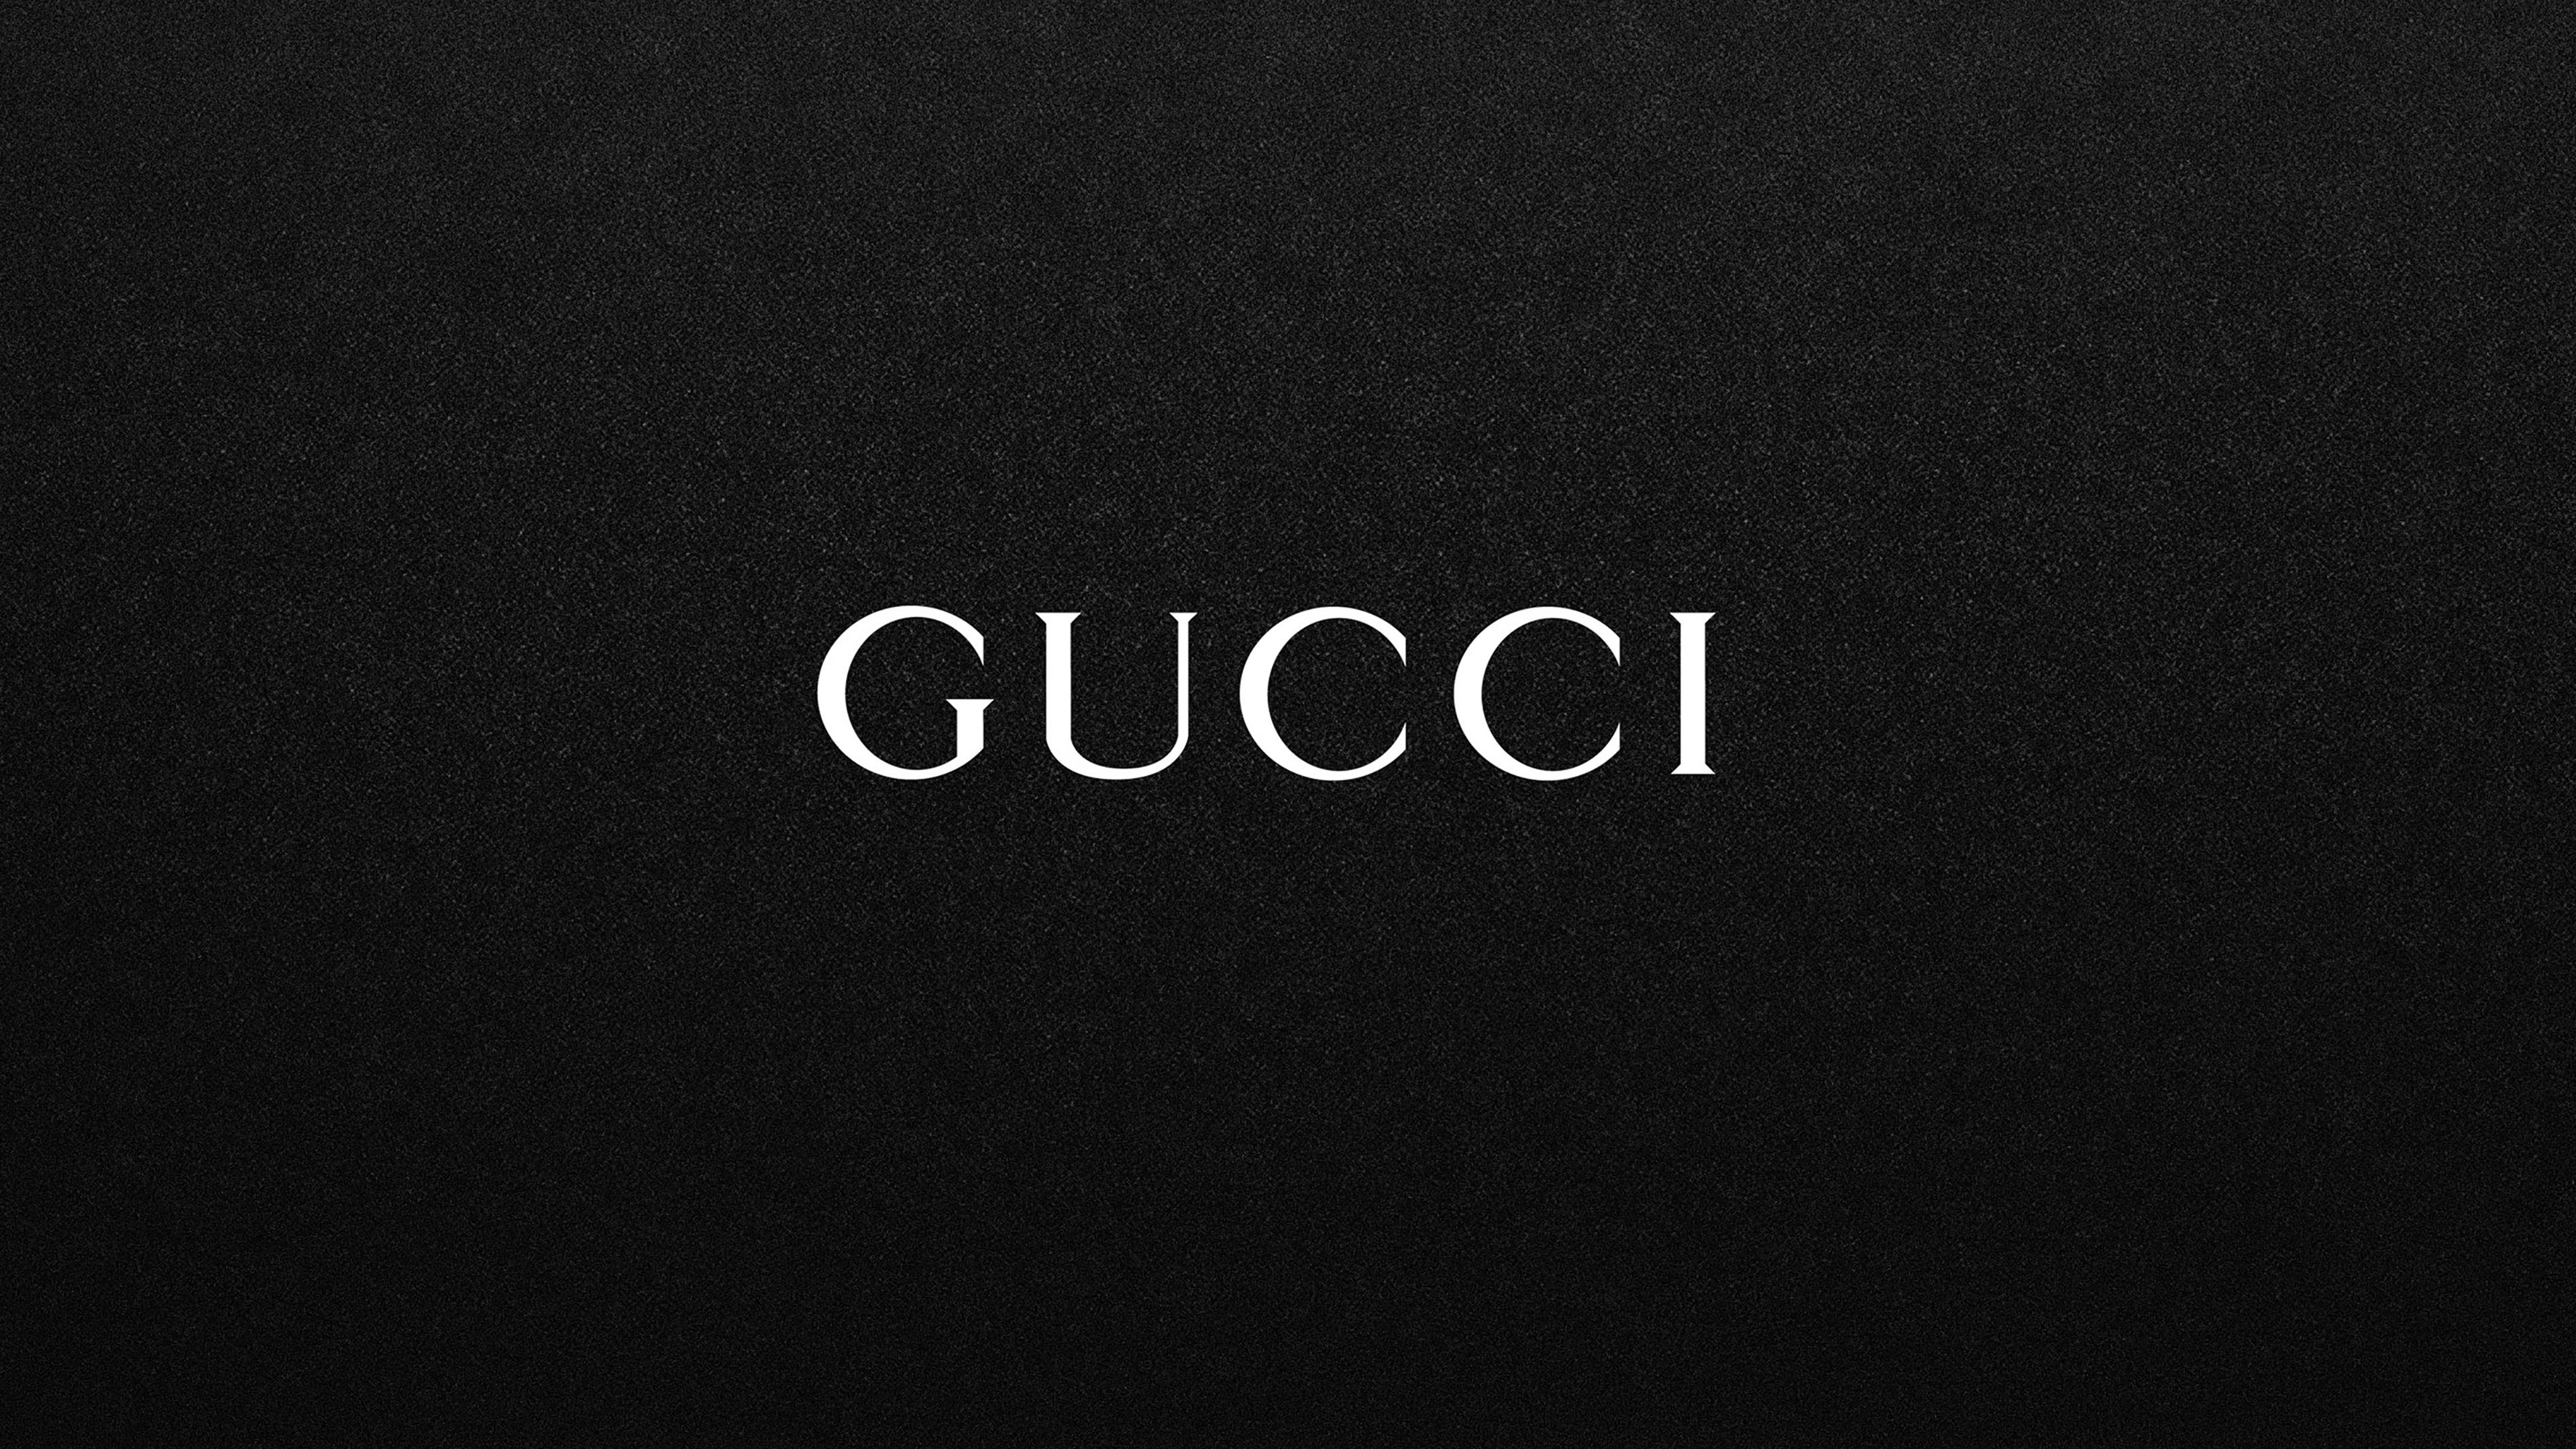 Gucci: An Italian high-end luxury fashion house based in Florence, Italy. 3840x2160 4K Wallpaper.